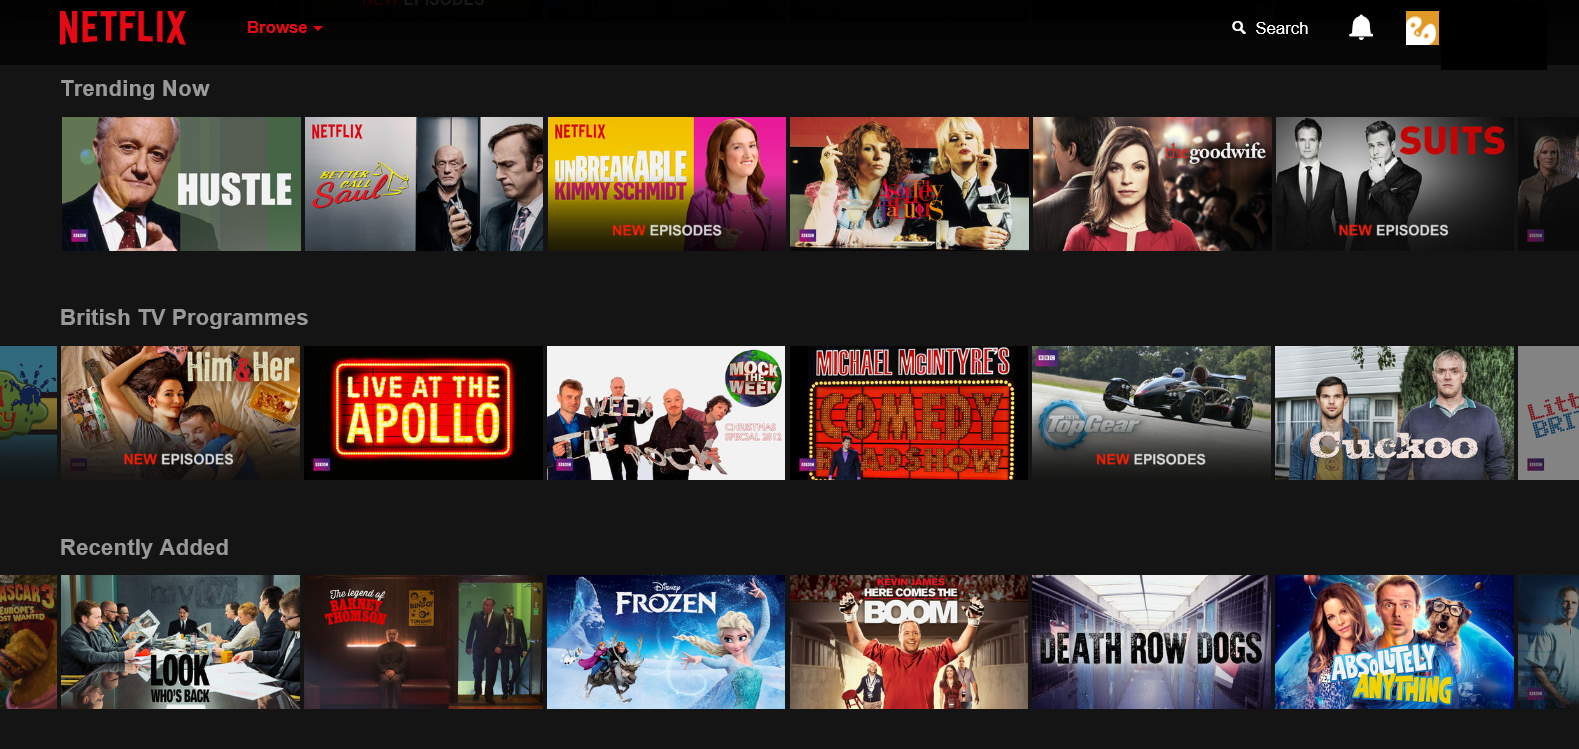 5 TV shows you have to watch on Netflix UK